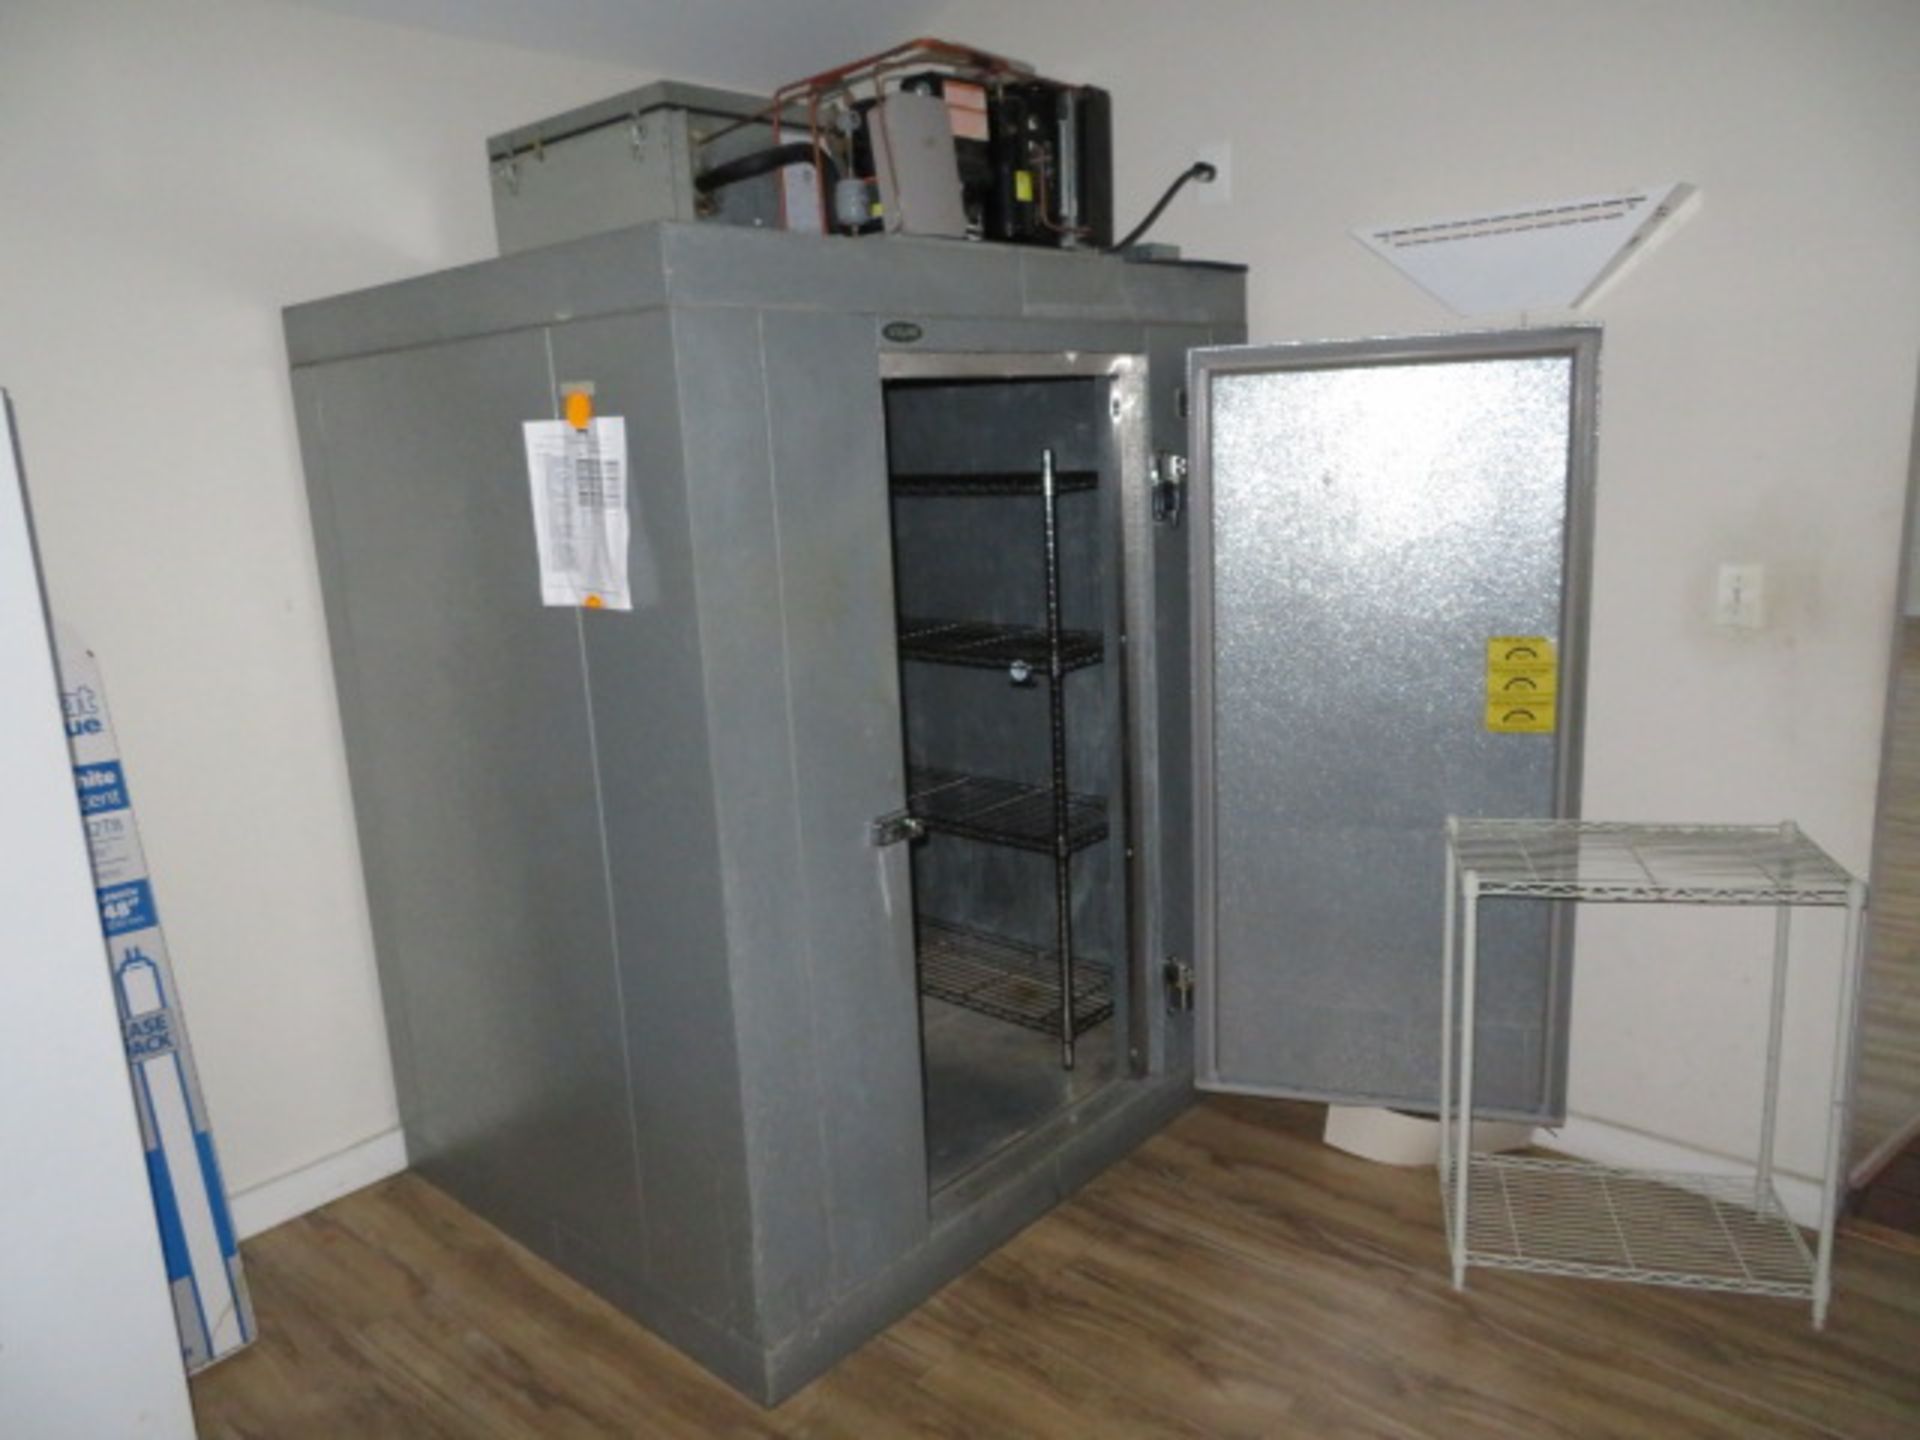 NORLAKE WALK-IN COOLER, 5'X5' W/SHELVING, MDL. KLB45-CR-SUB (Located - Mays Landing, NJ) - Image 2 of 9